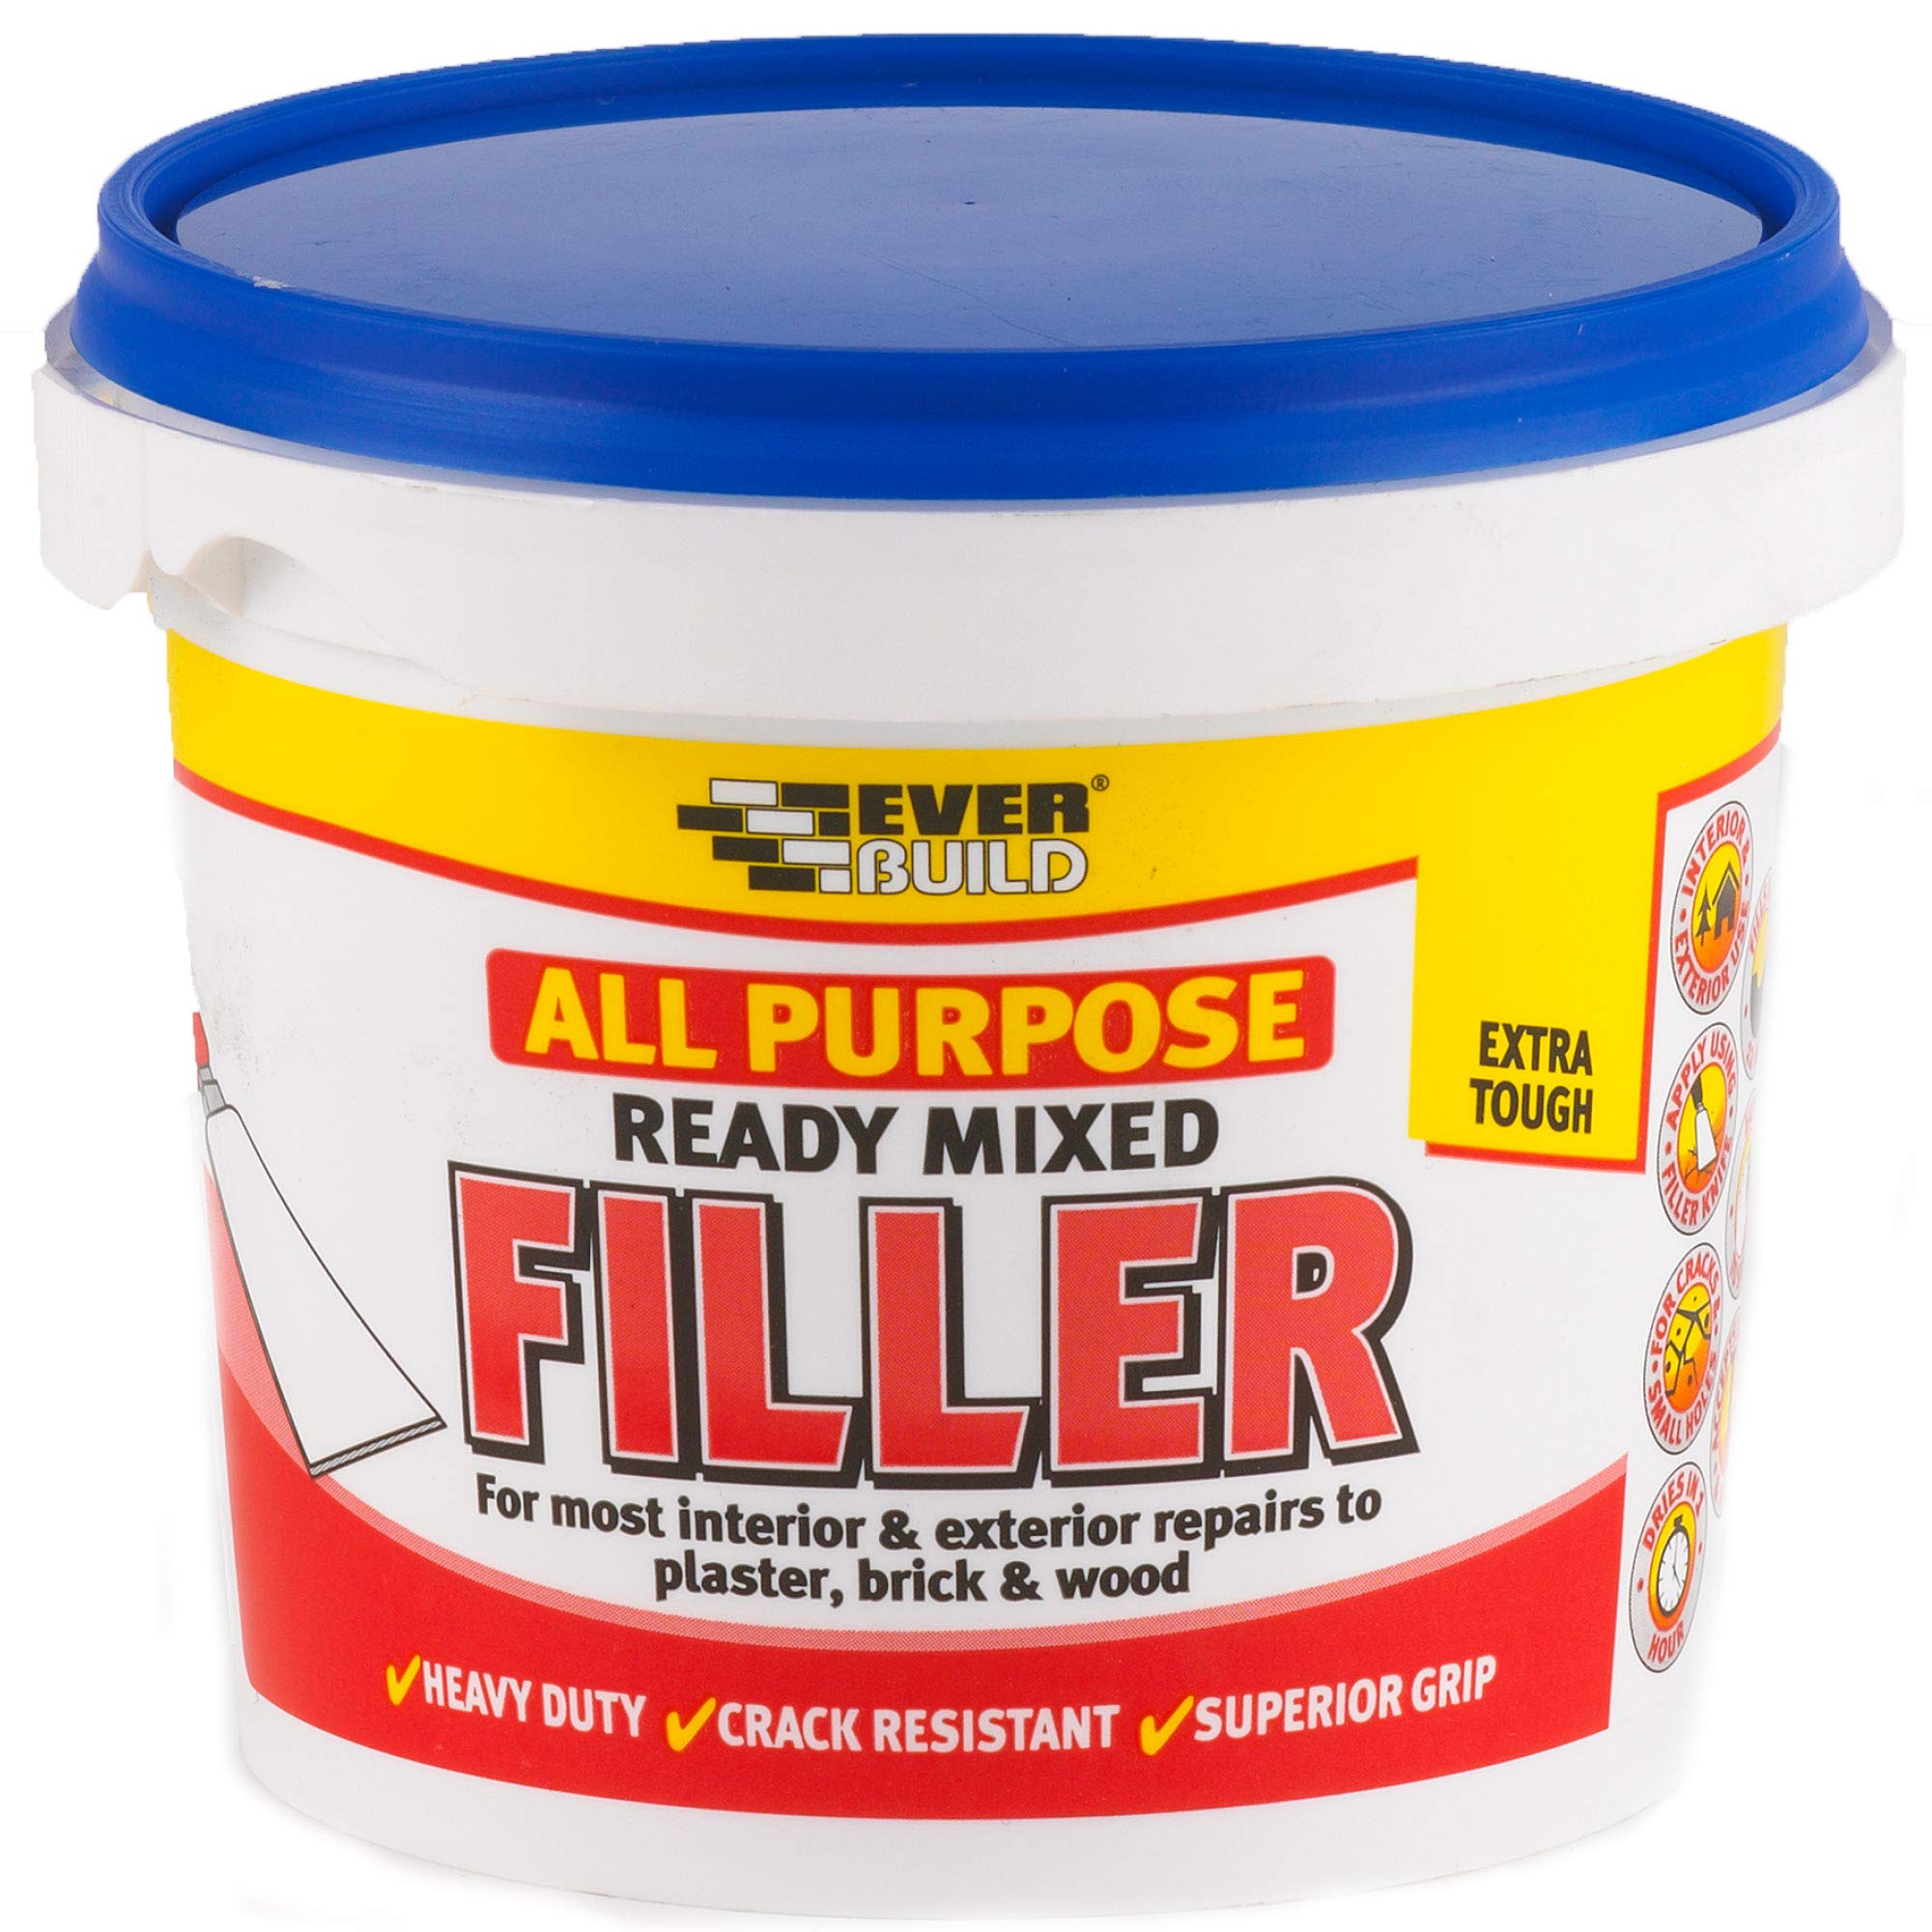 Everbuild All Purpose Ready Mixed Filler White - 600g